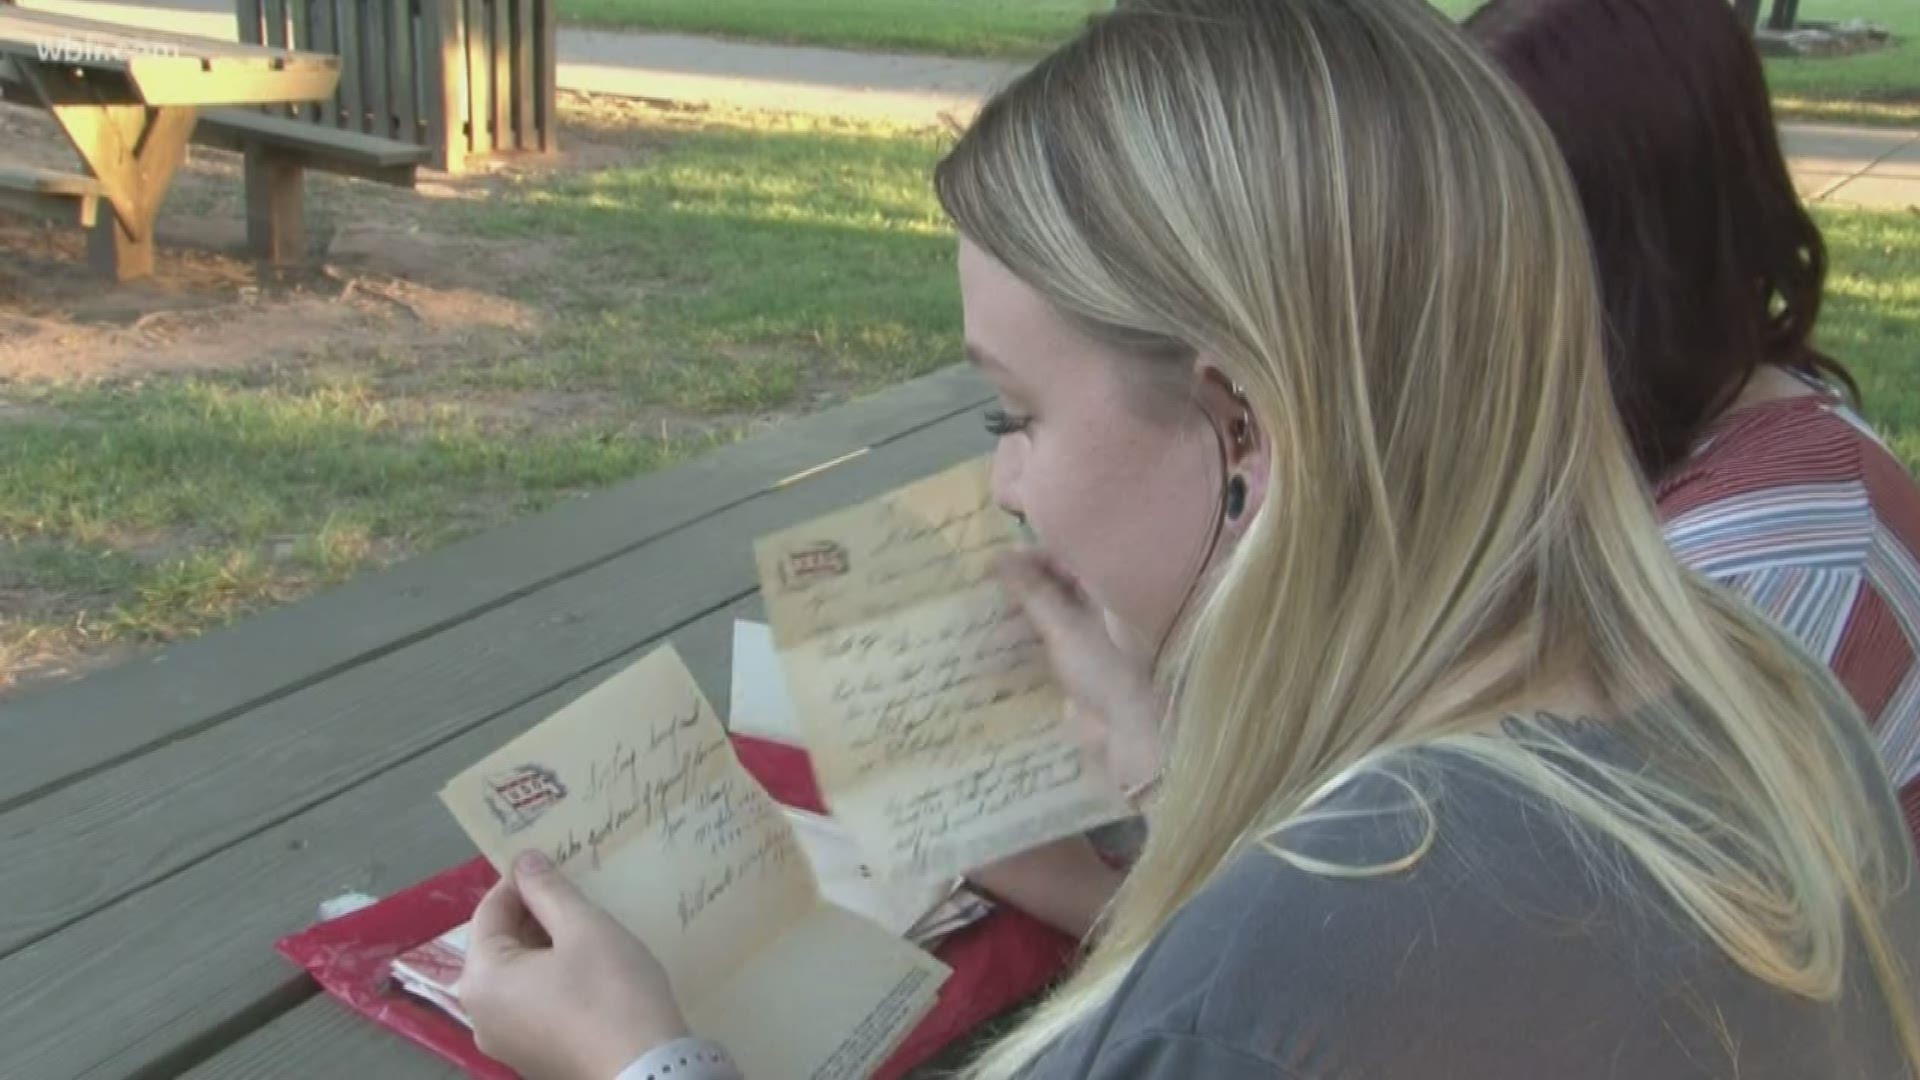 The World War II love letters found at the Smoky Mountains Knifeworks store are now in the hands of the rightful owners.